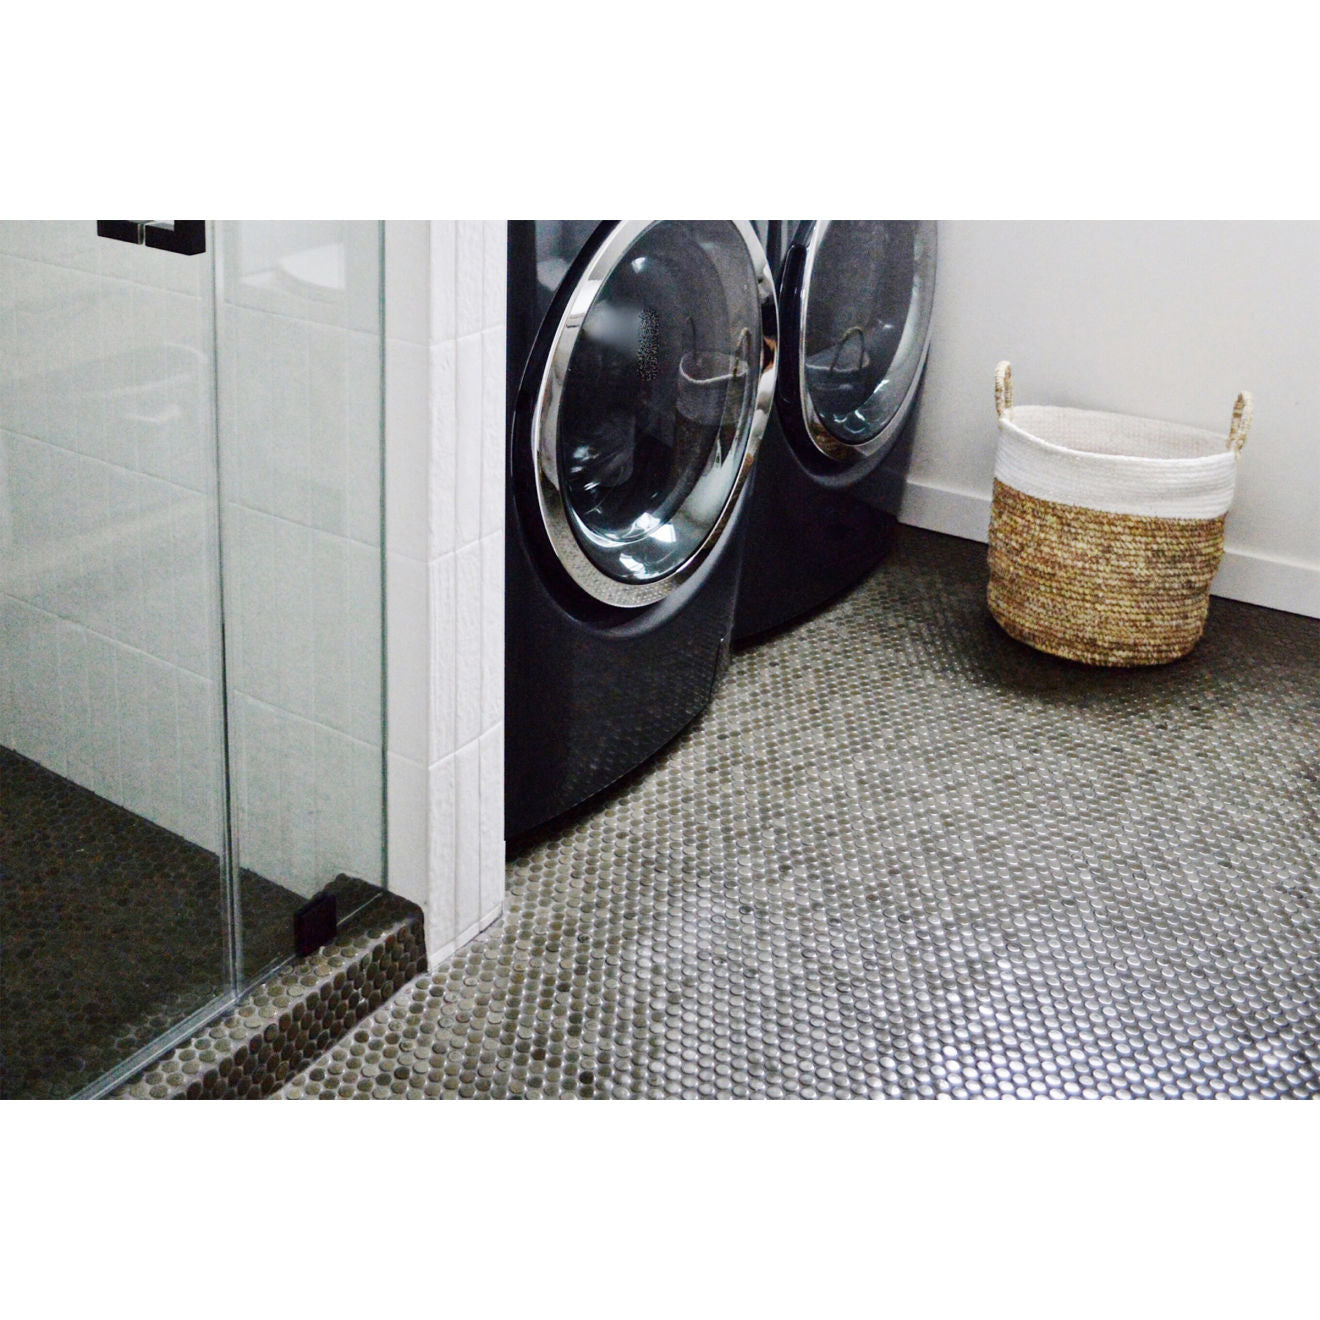 Pumice and charcoal penny round tiles lining the laundry room and shower floor.